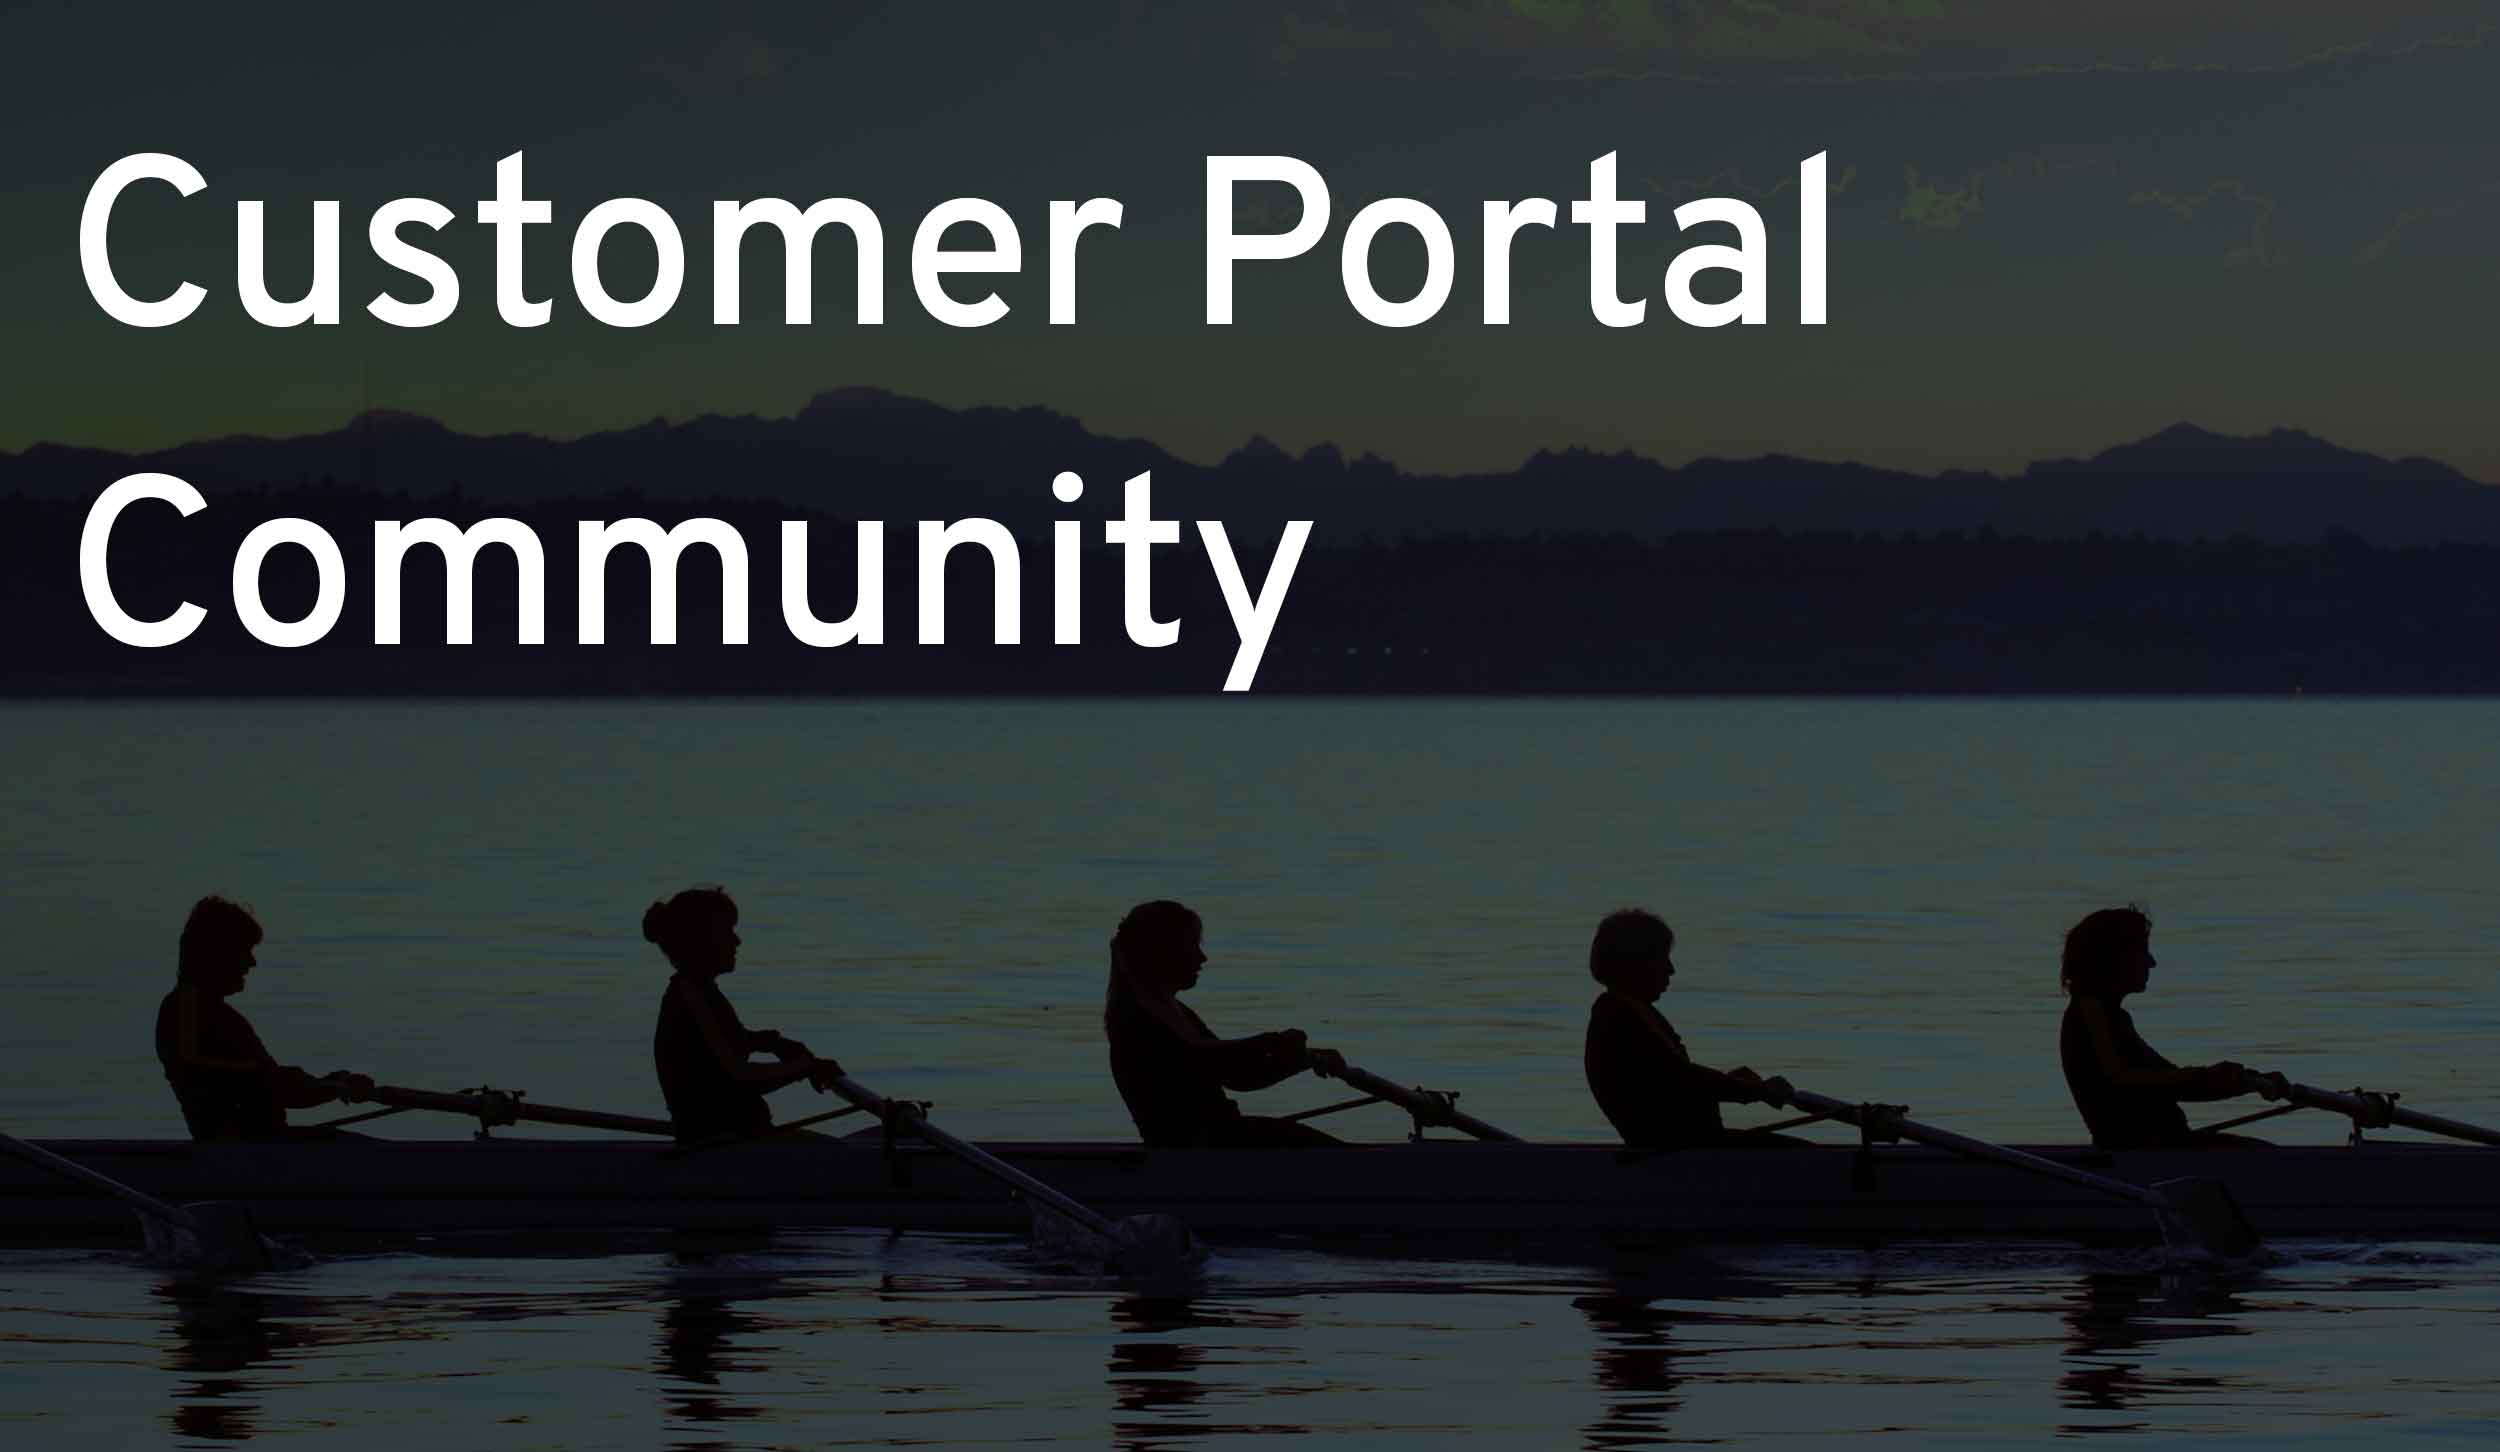 An all-new hub page for our customer community